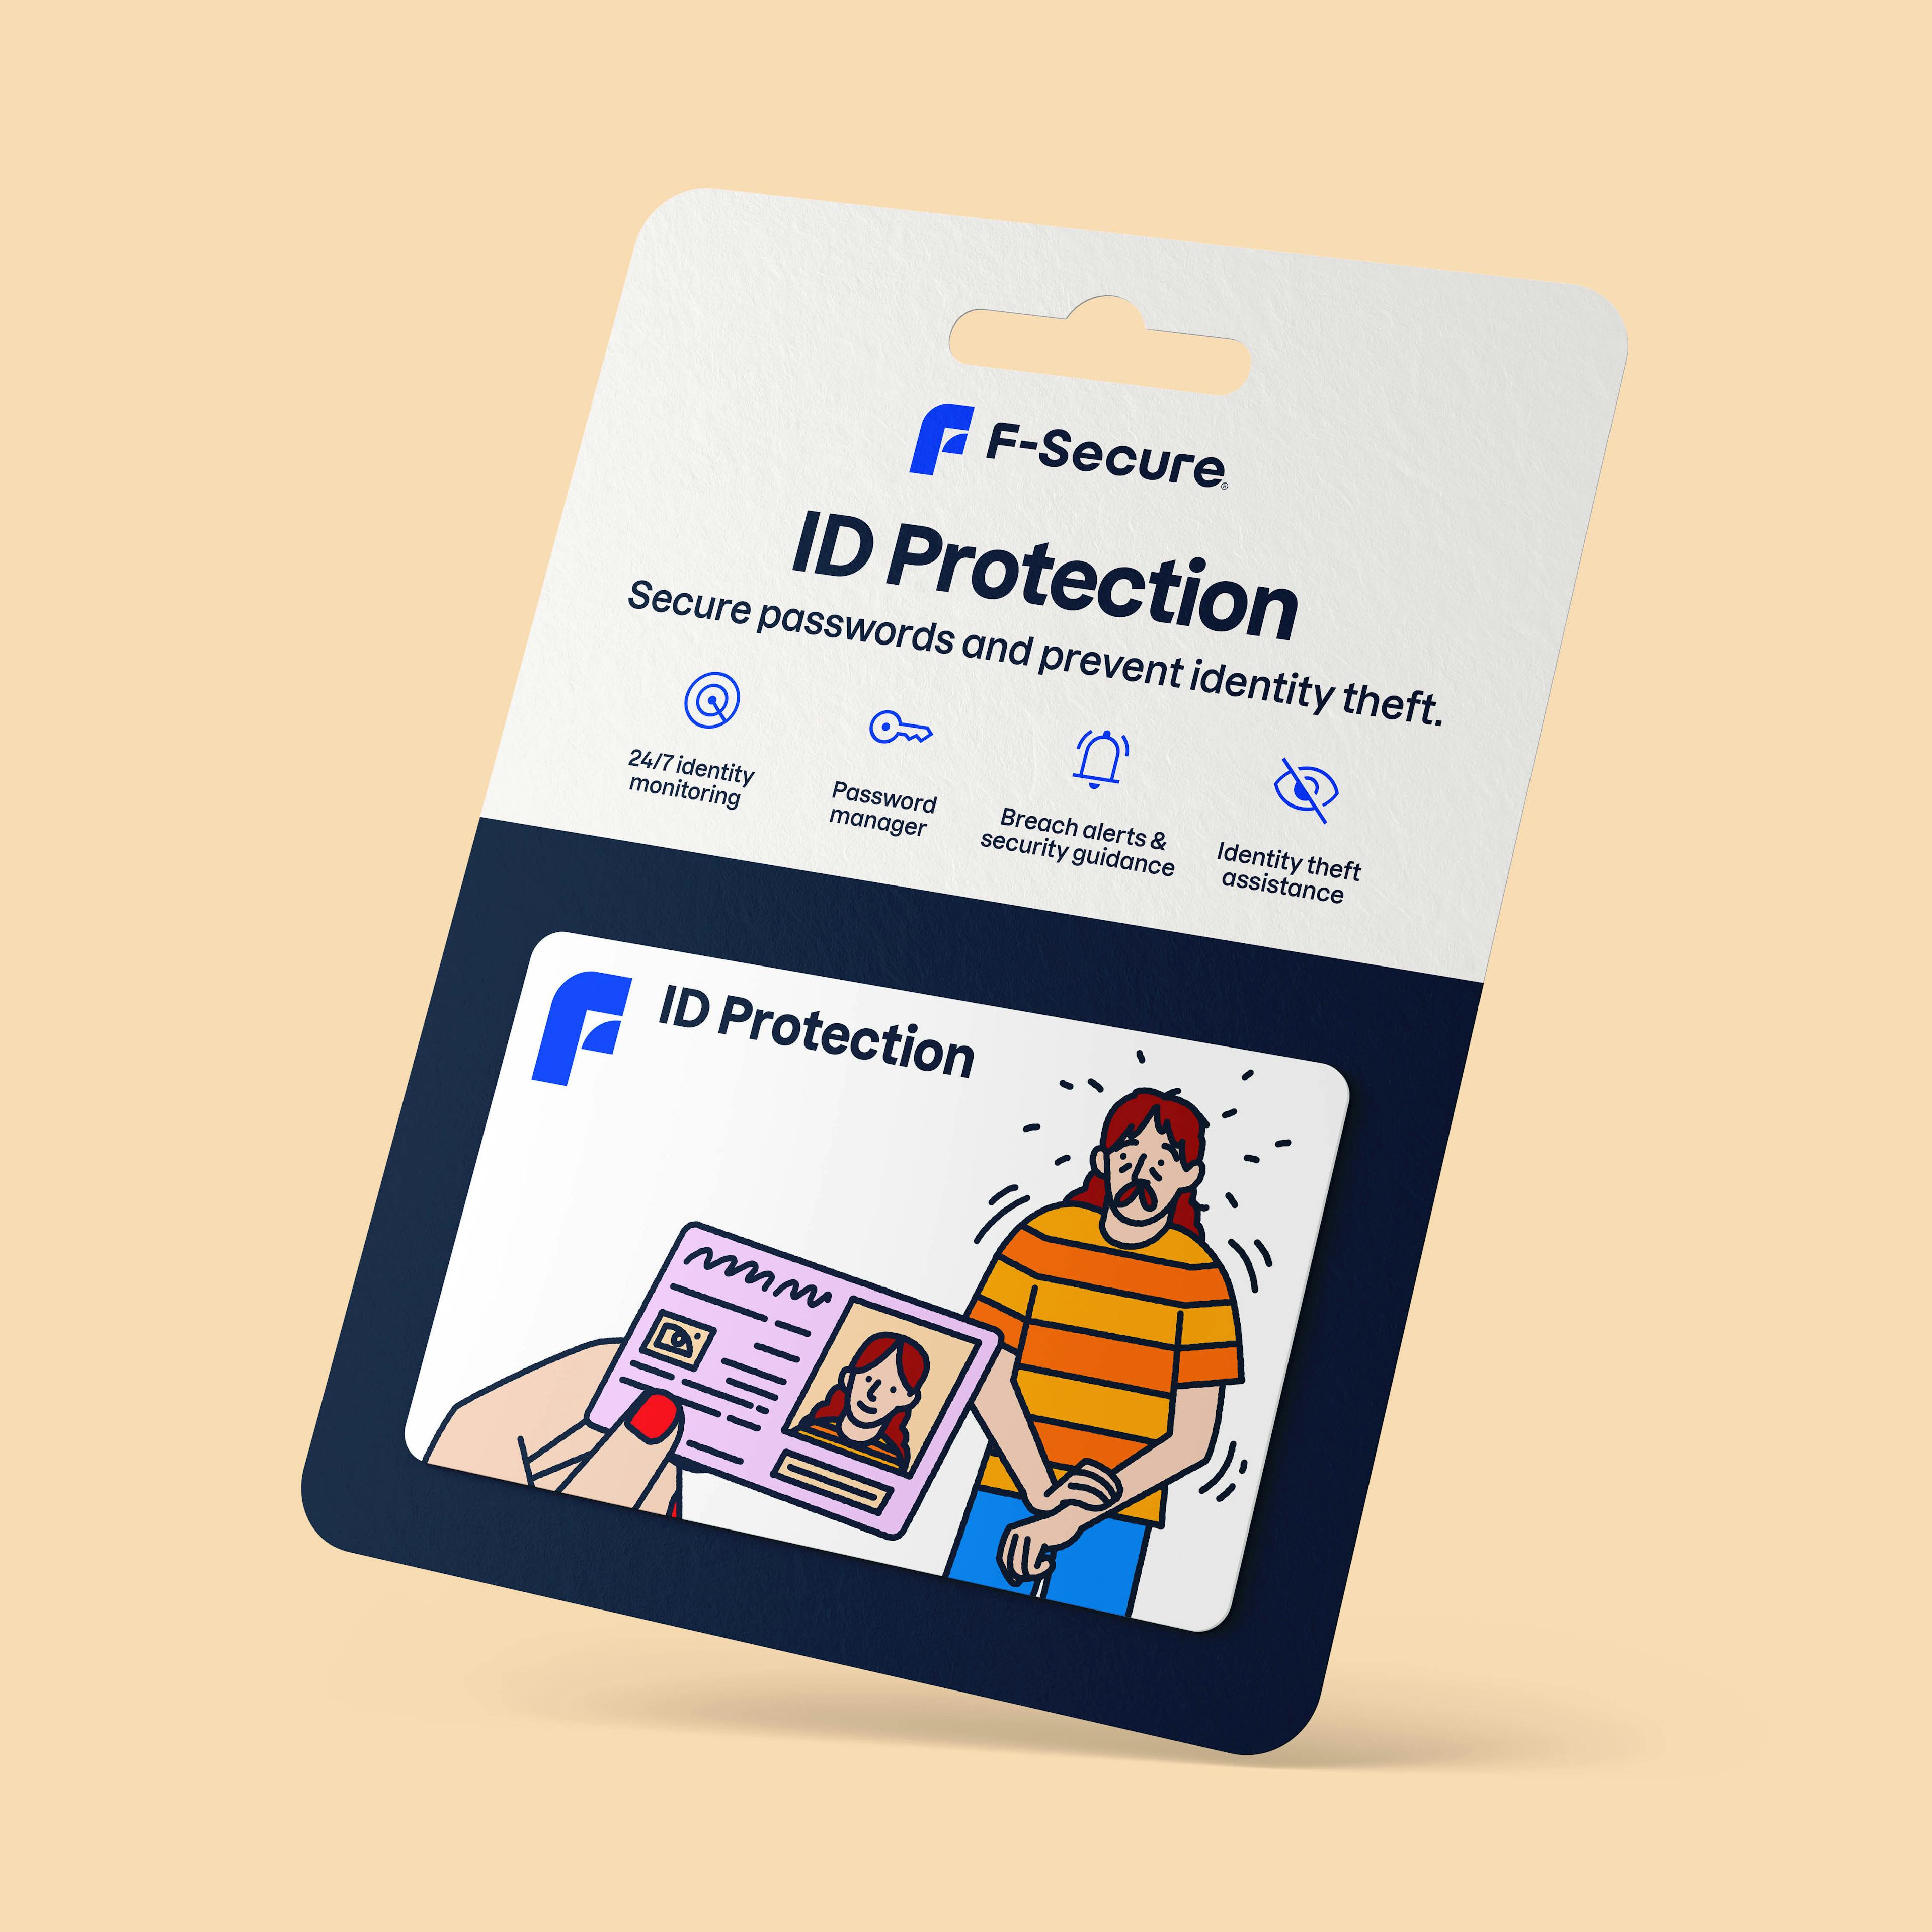 f-secure-product-card-1.1